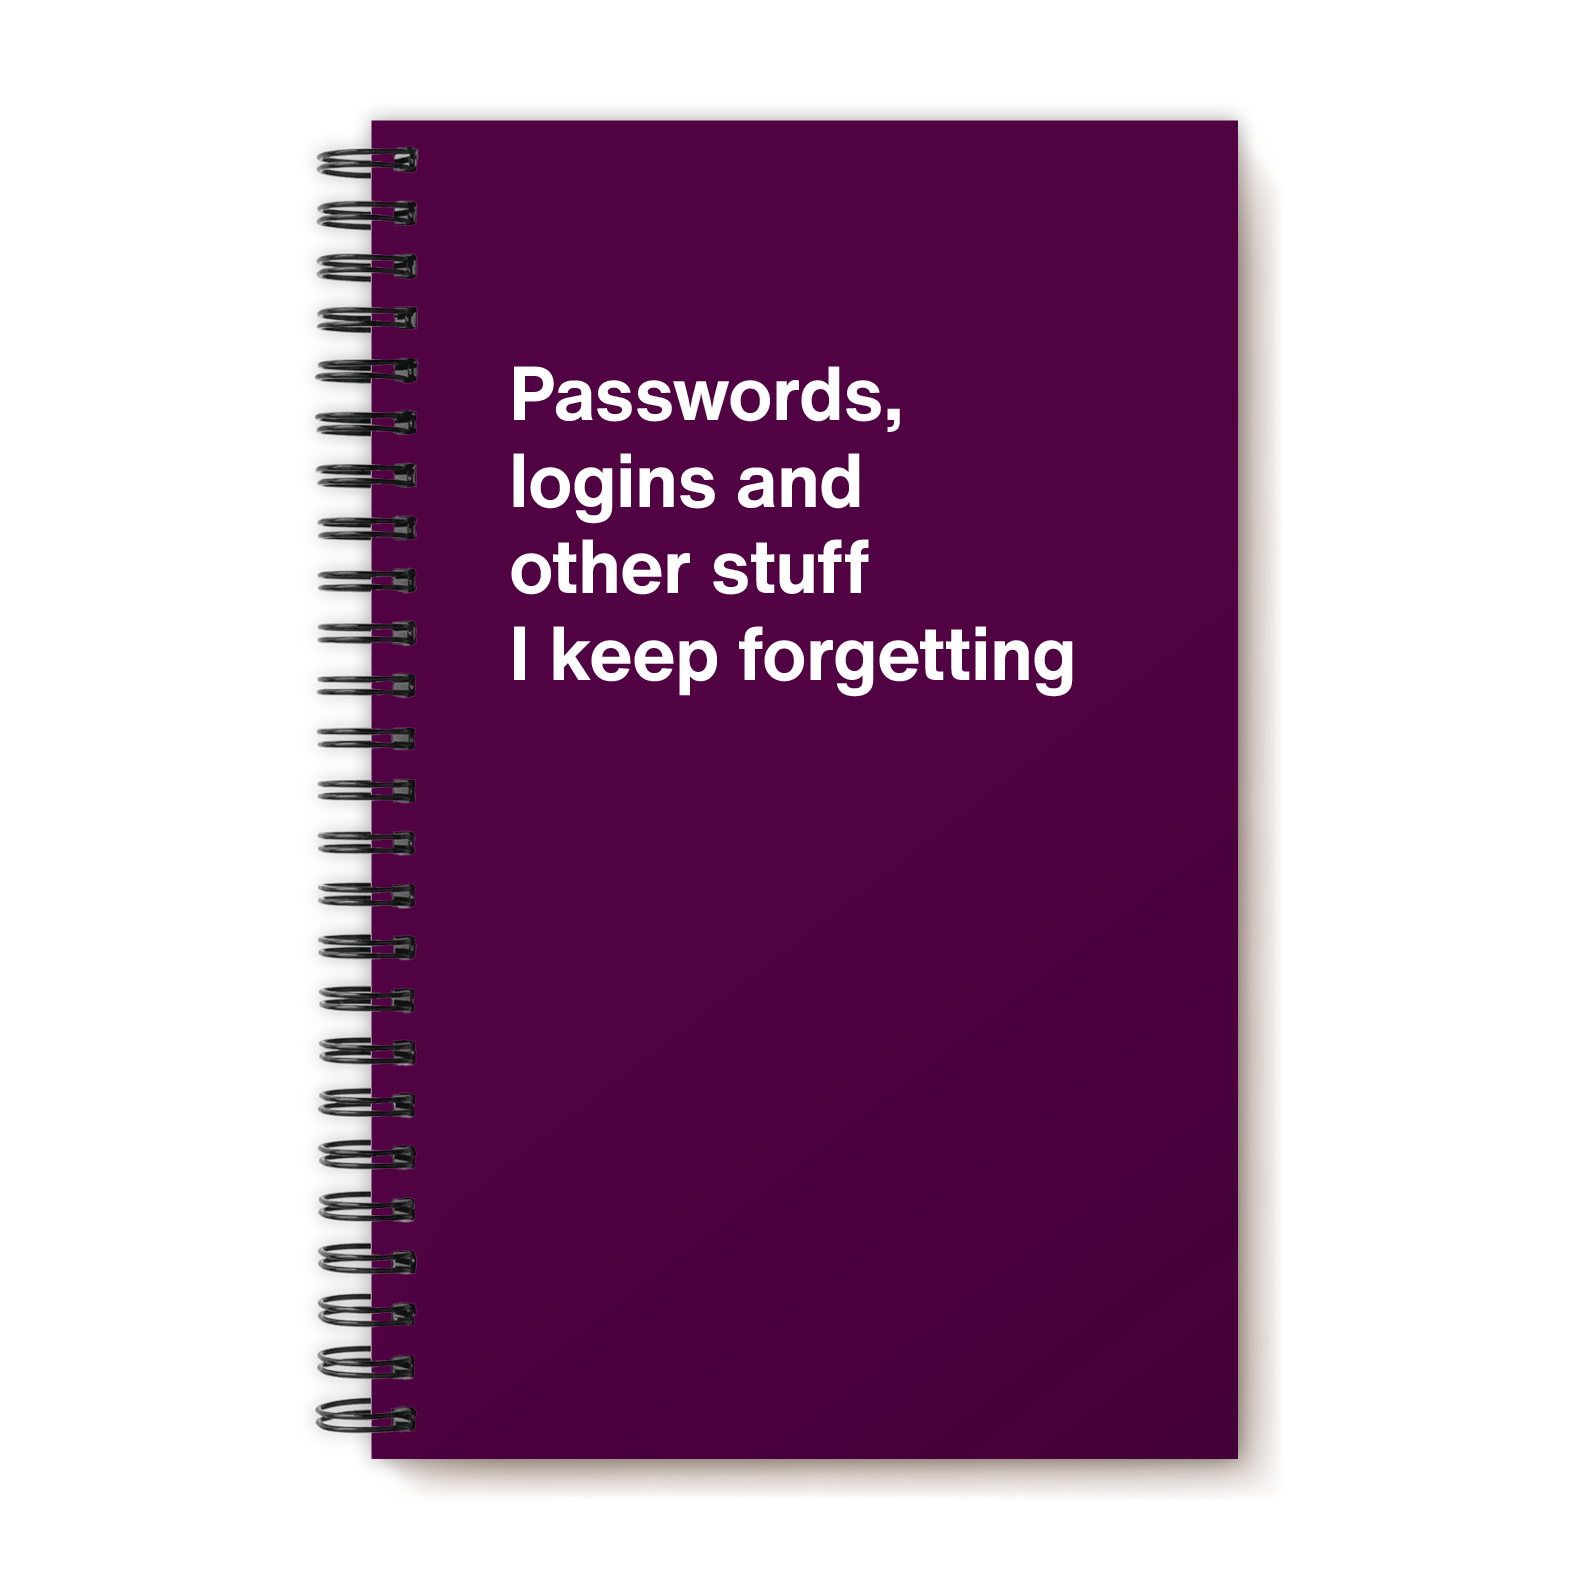 Passwords, logins and other stuff I keep forgetting | WTF Notebooks